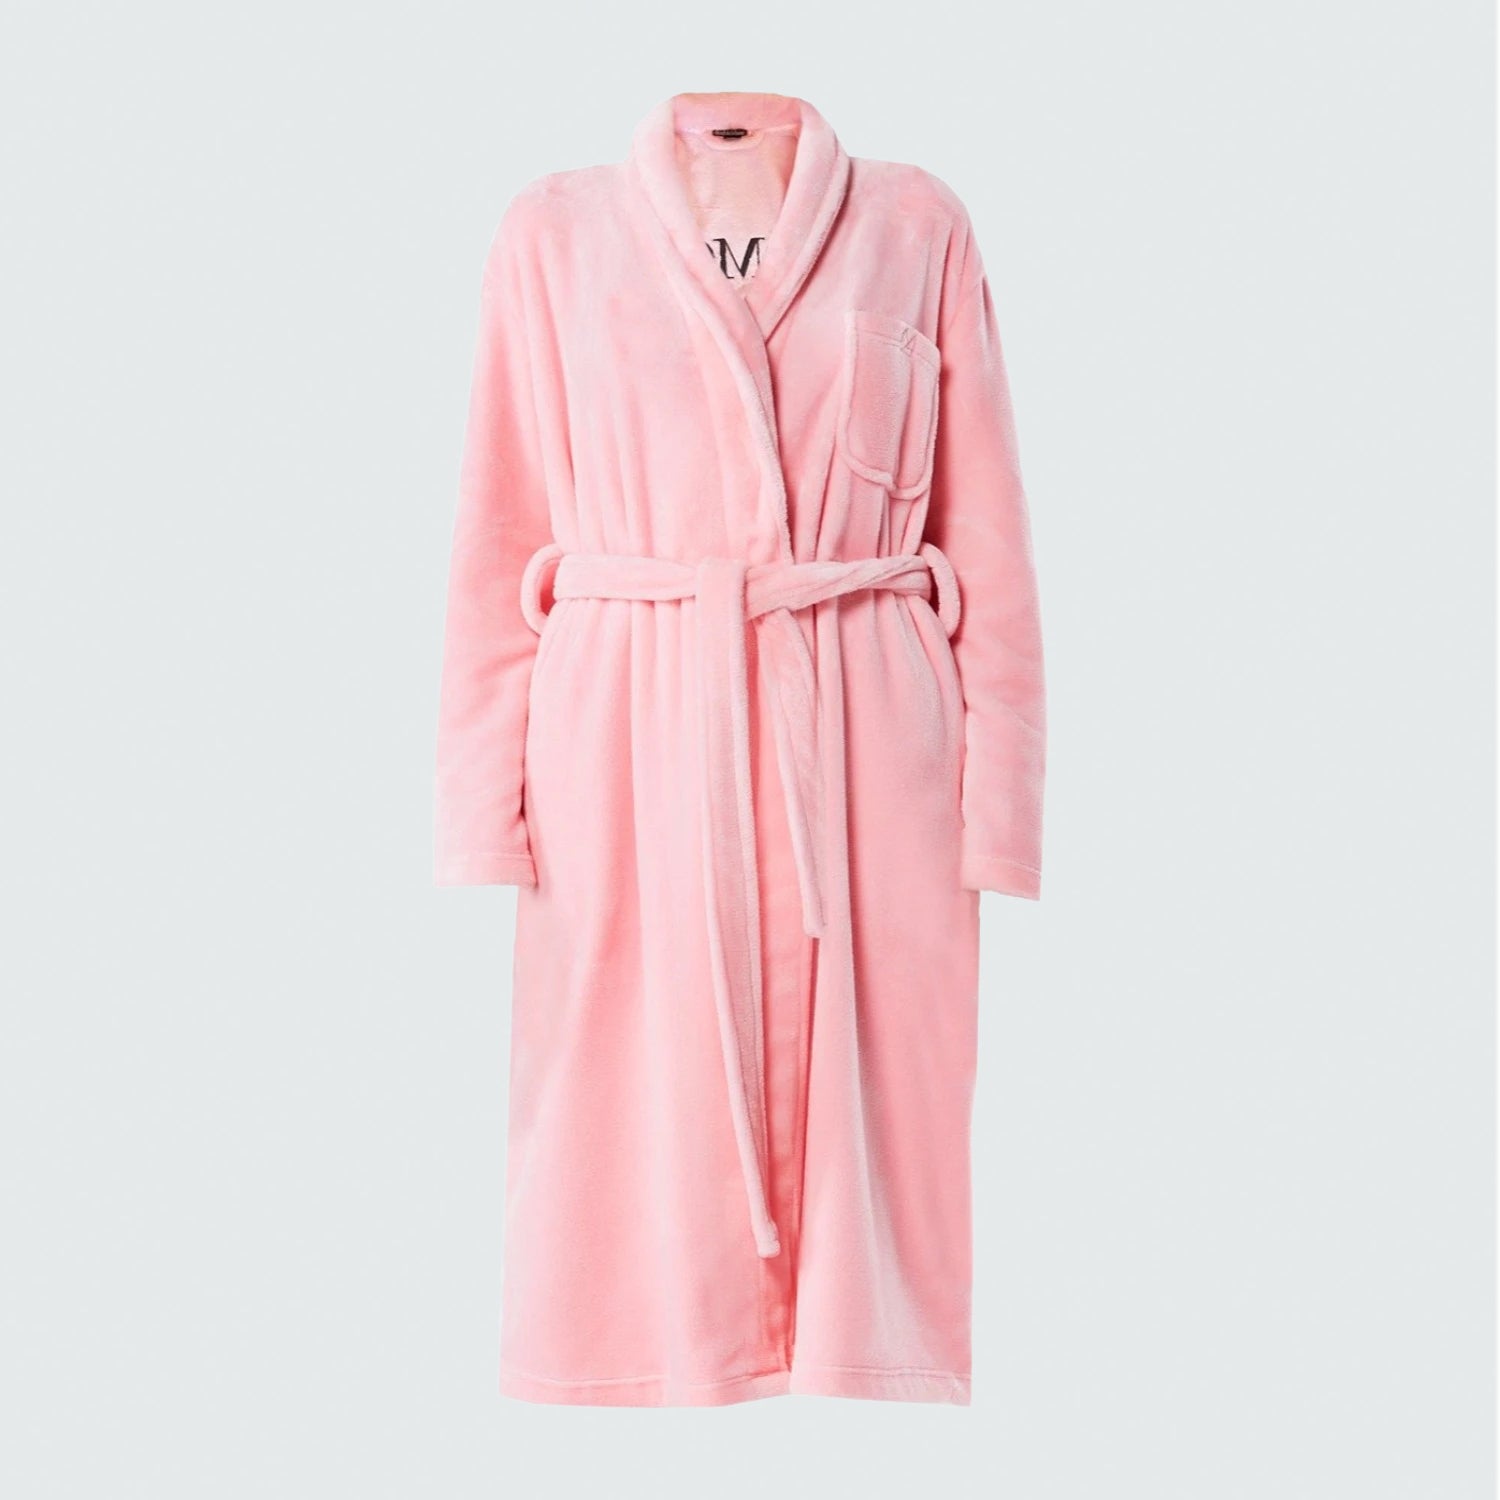 OMG! Spa Robe Pink - DOUBLE DARE